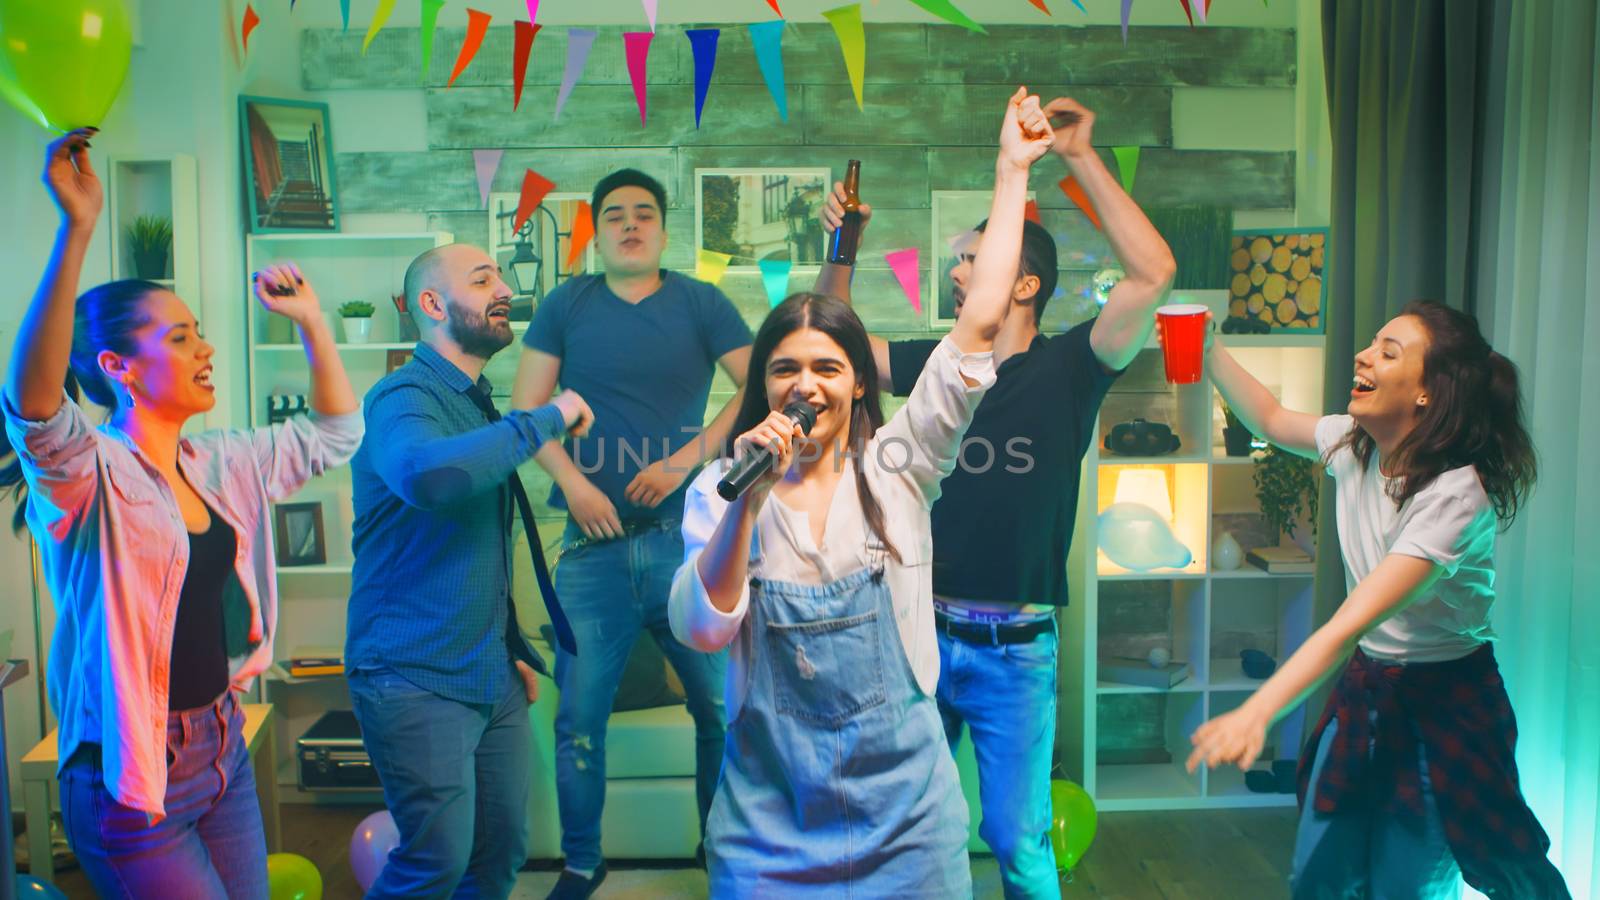 Beautiful young woman singing a song on microphone while partying with her group of friends in a room with neon lights, disco ball and alcohol